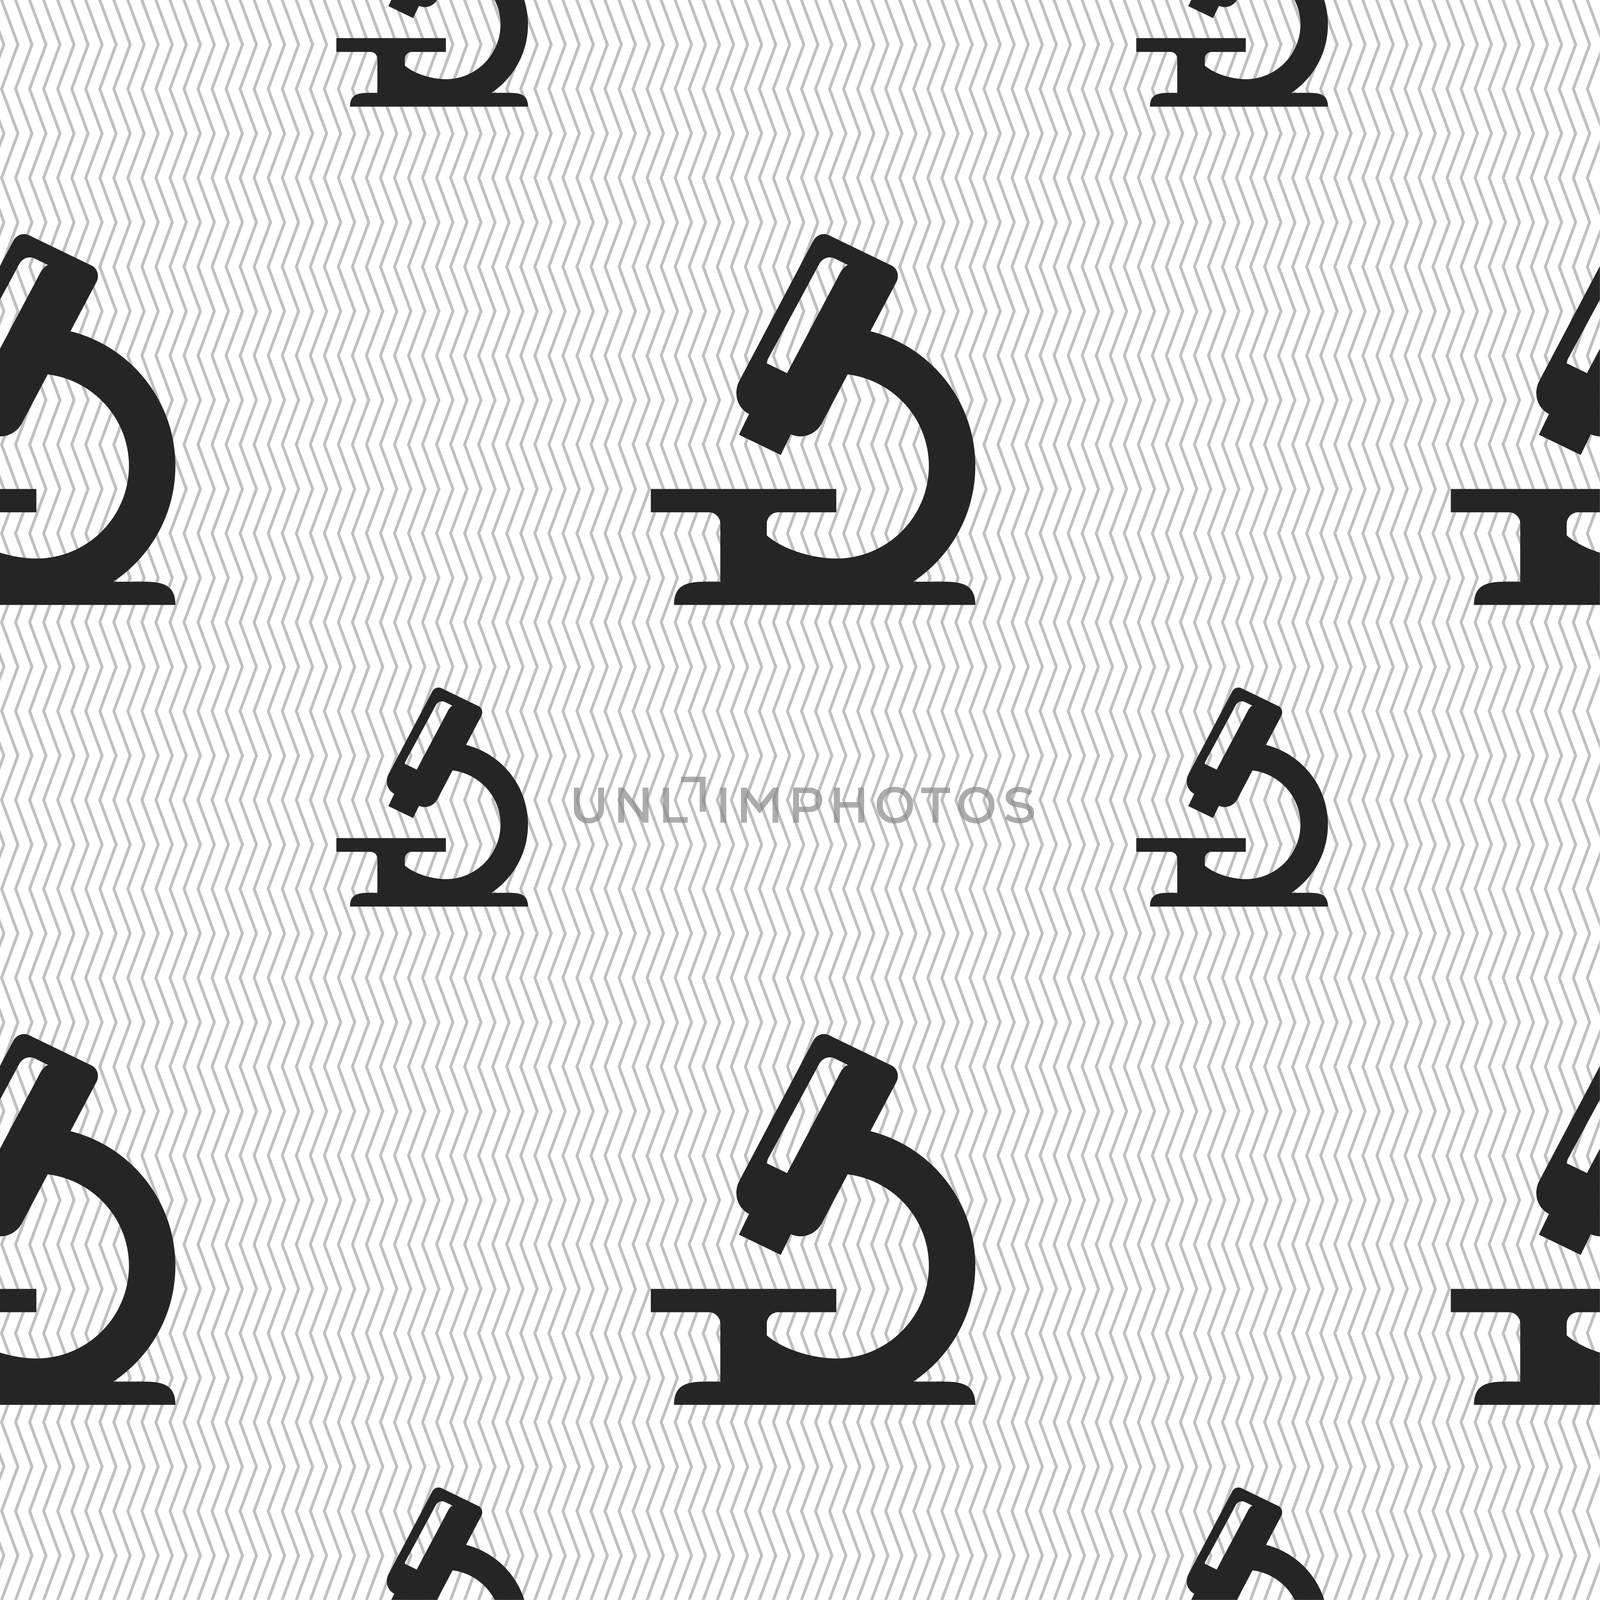 microscope icon sign. Seamless pattern with geometric texture. illustration